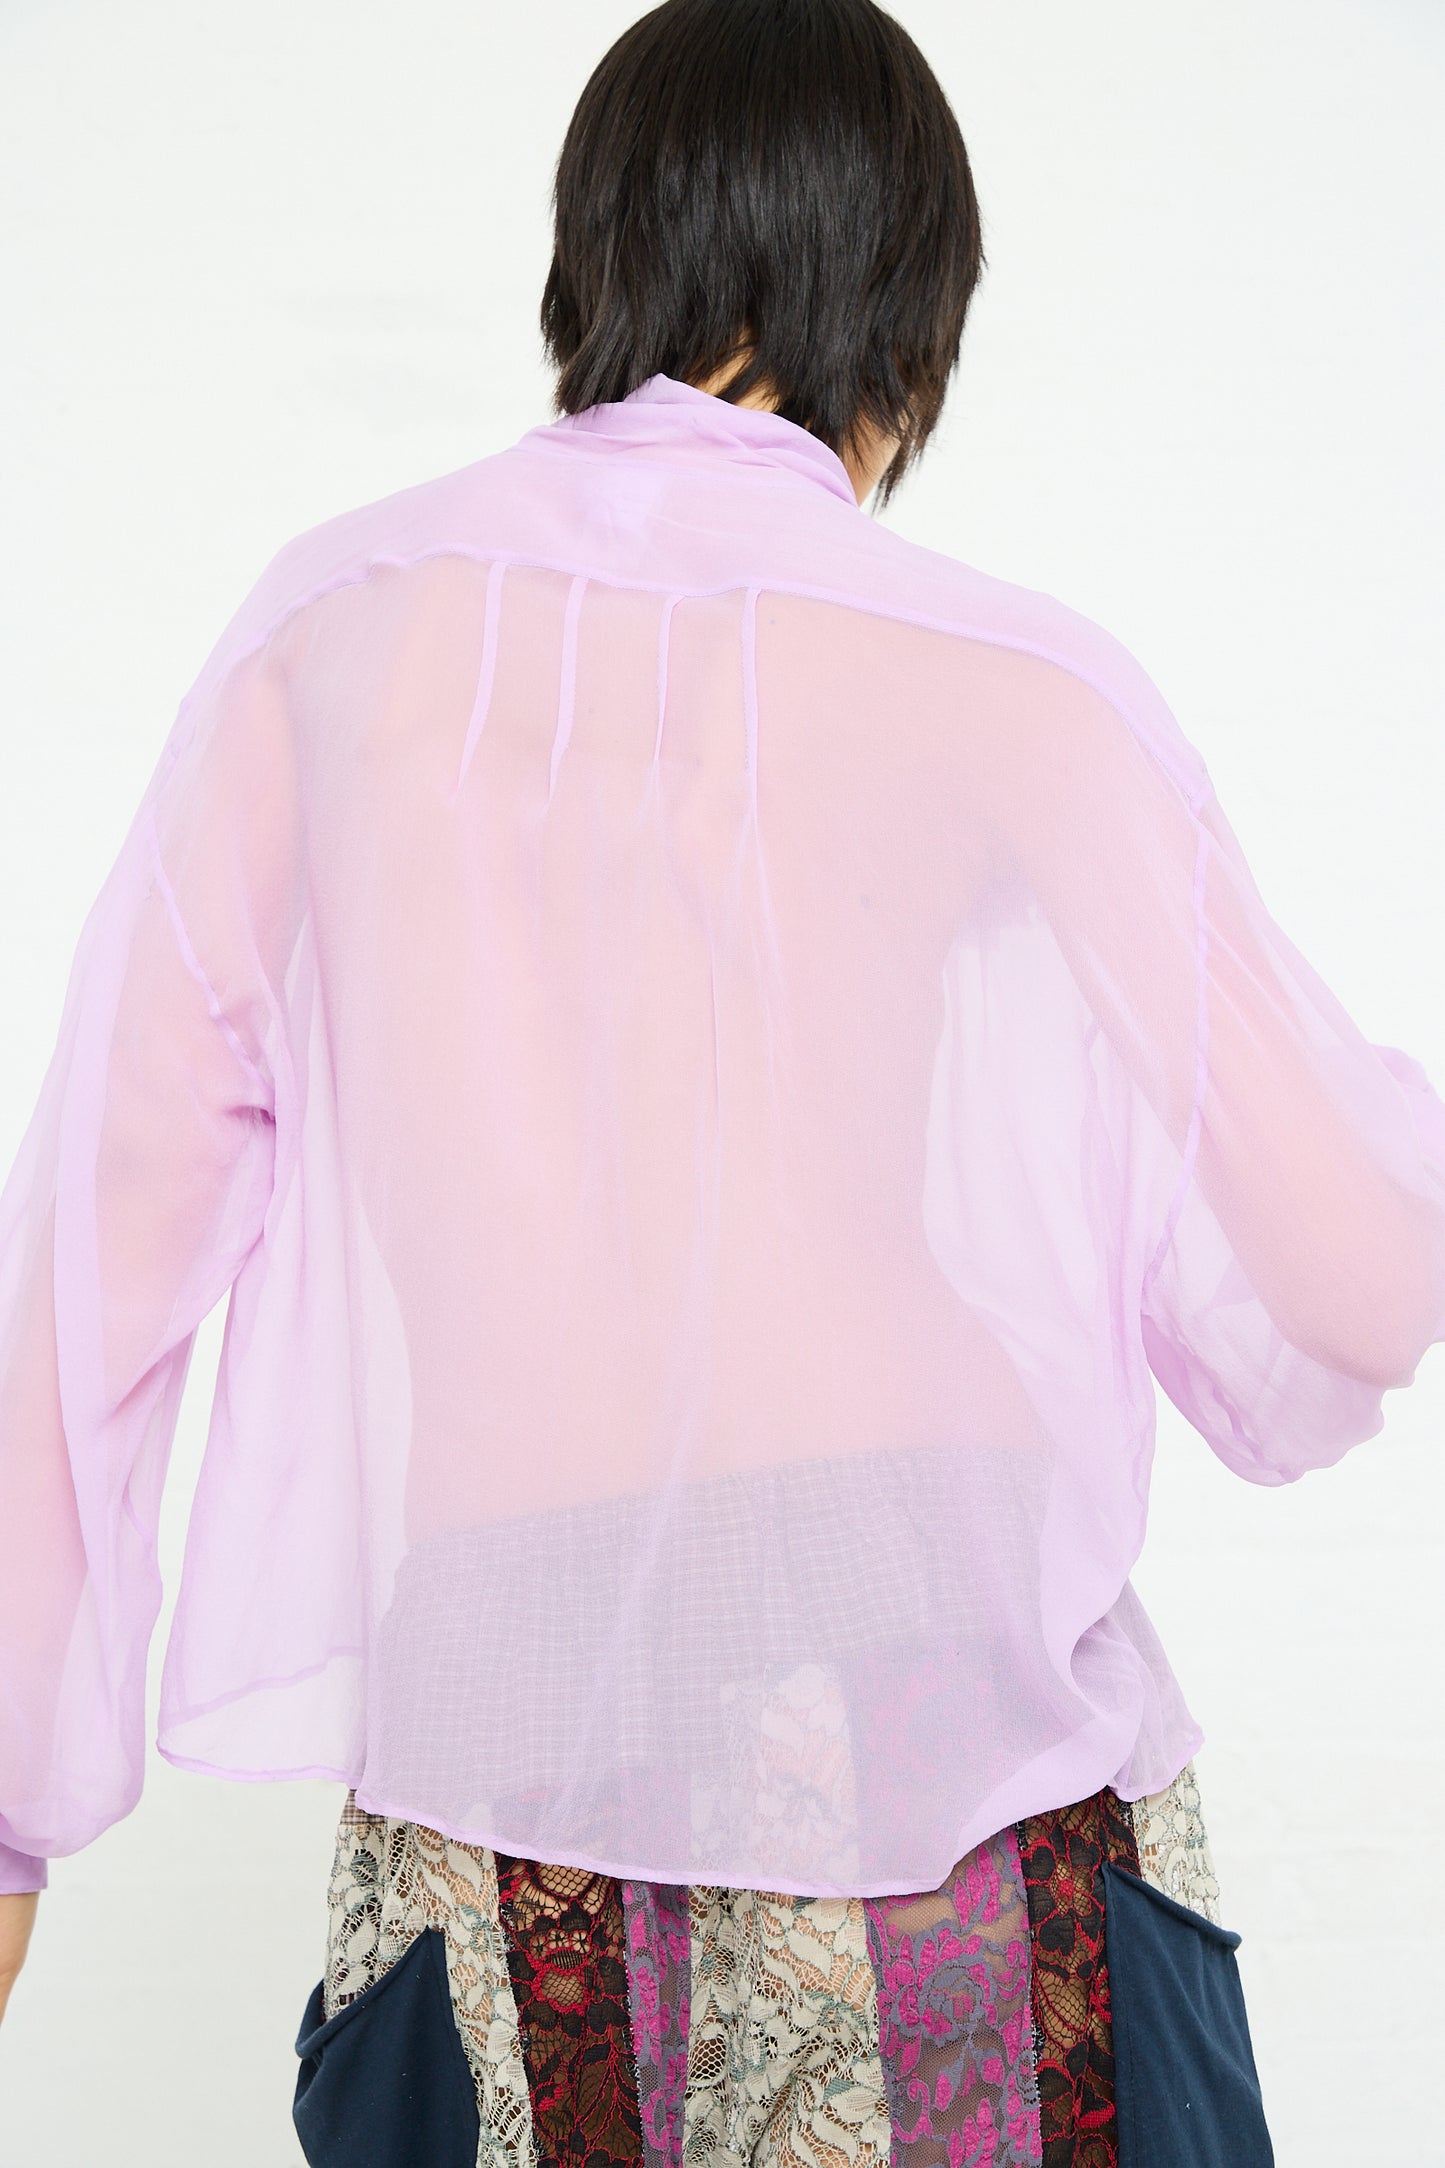 A person wearing a sheer pink Silk Chiffon Mandolin Blouse with rosette detail and patterned bottoms, viewed from behind.